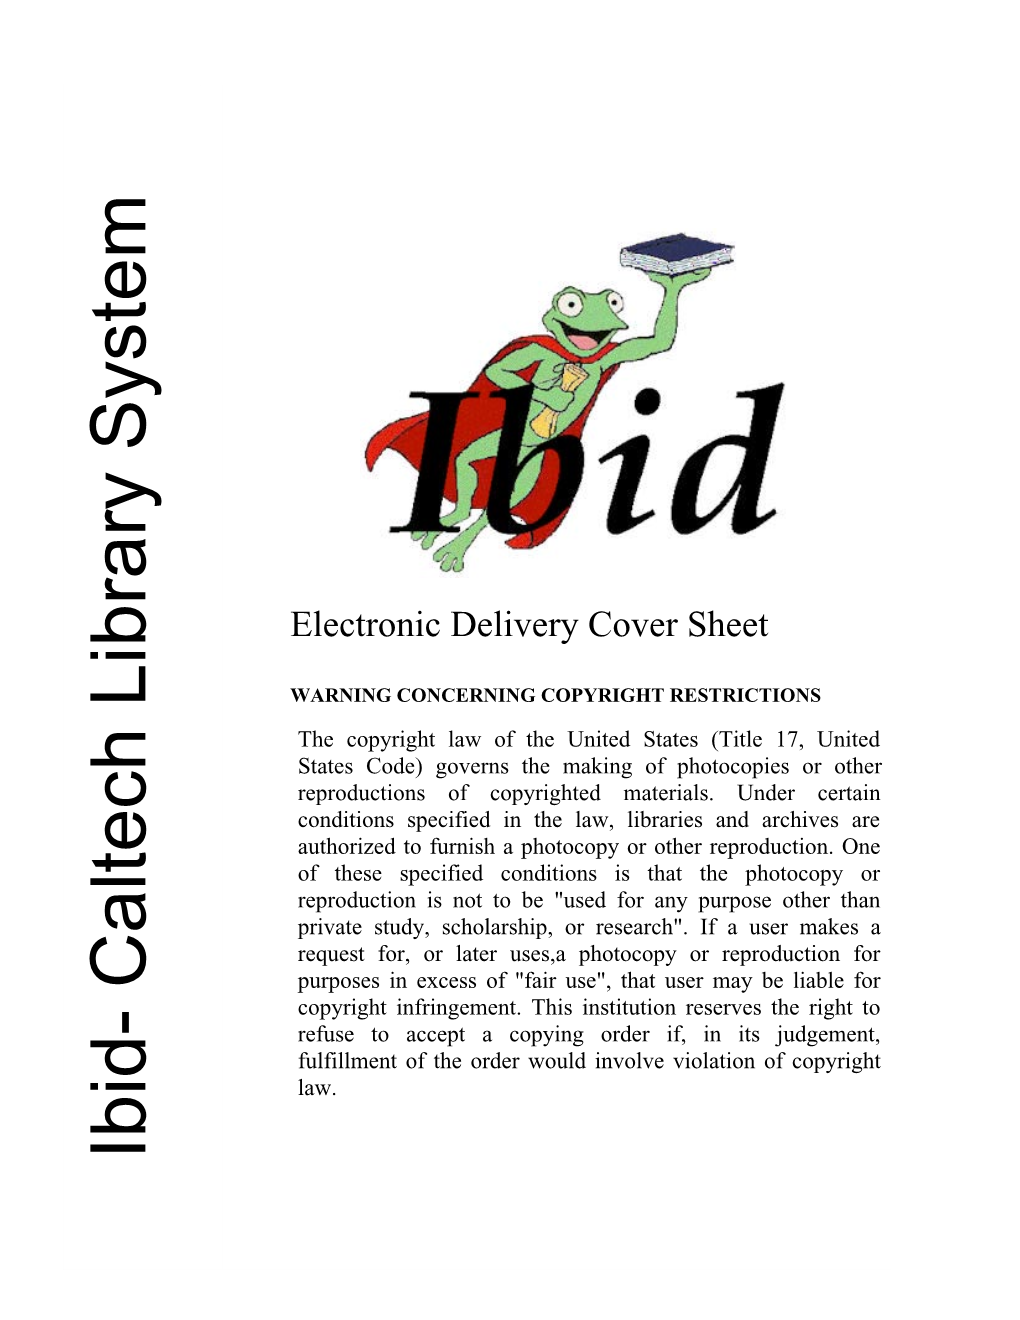 Ibid- Caltech Library System WARNING CONCERNINGCOPYRIGHTRESTRICTIONS Electronic Deliverycoversheet Law